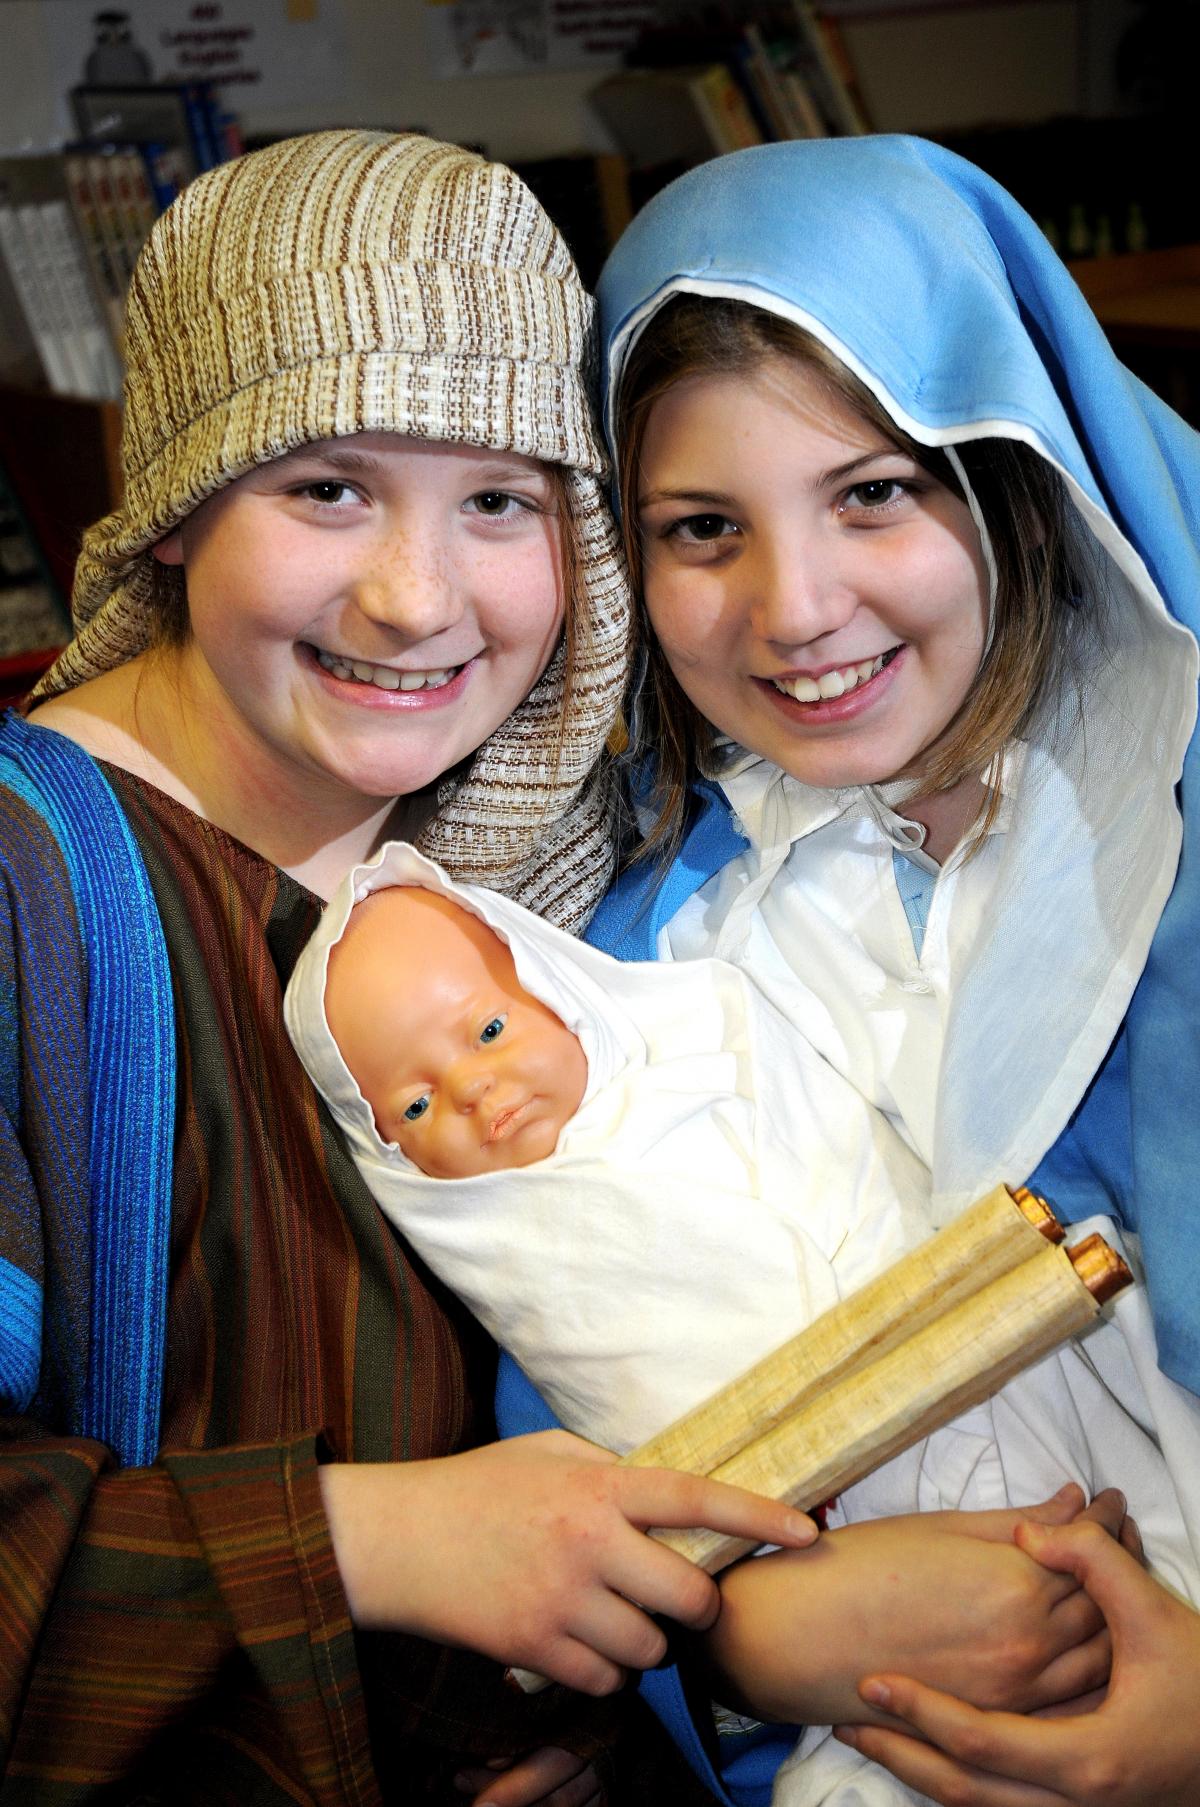 Appearing in St Oswald's CE Primary School Nativity were Chloe Wager and Annabel Tate as Mary and Joseph